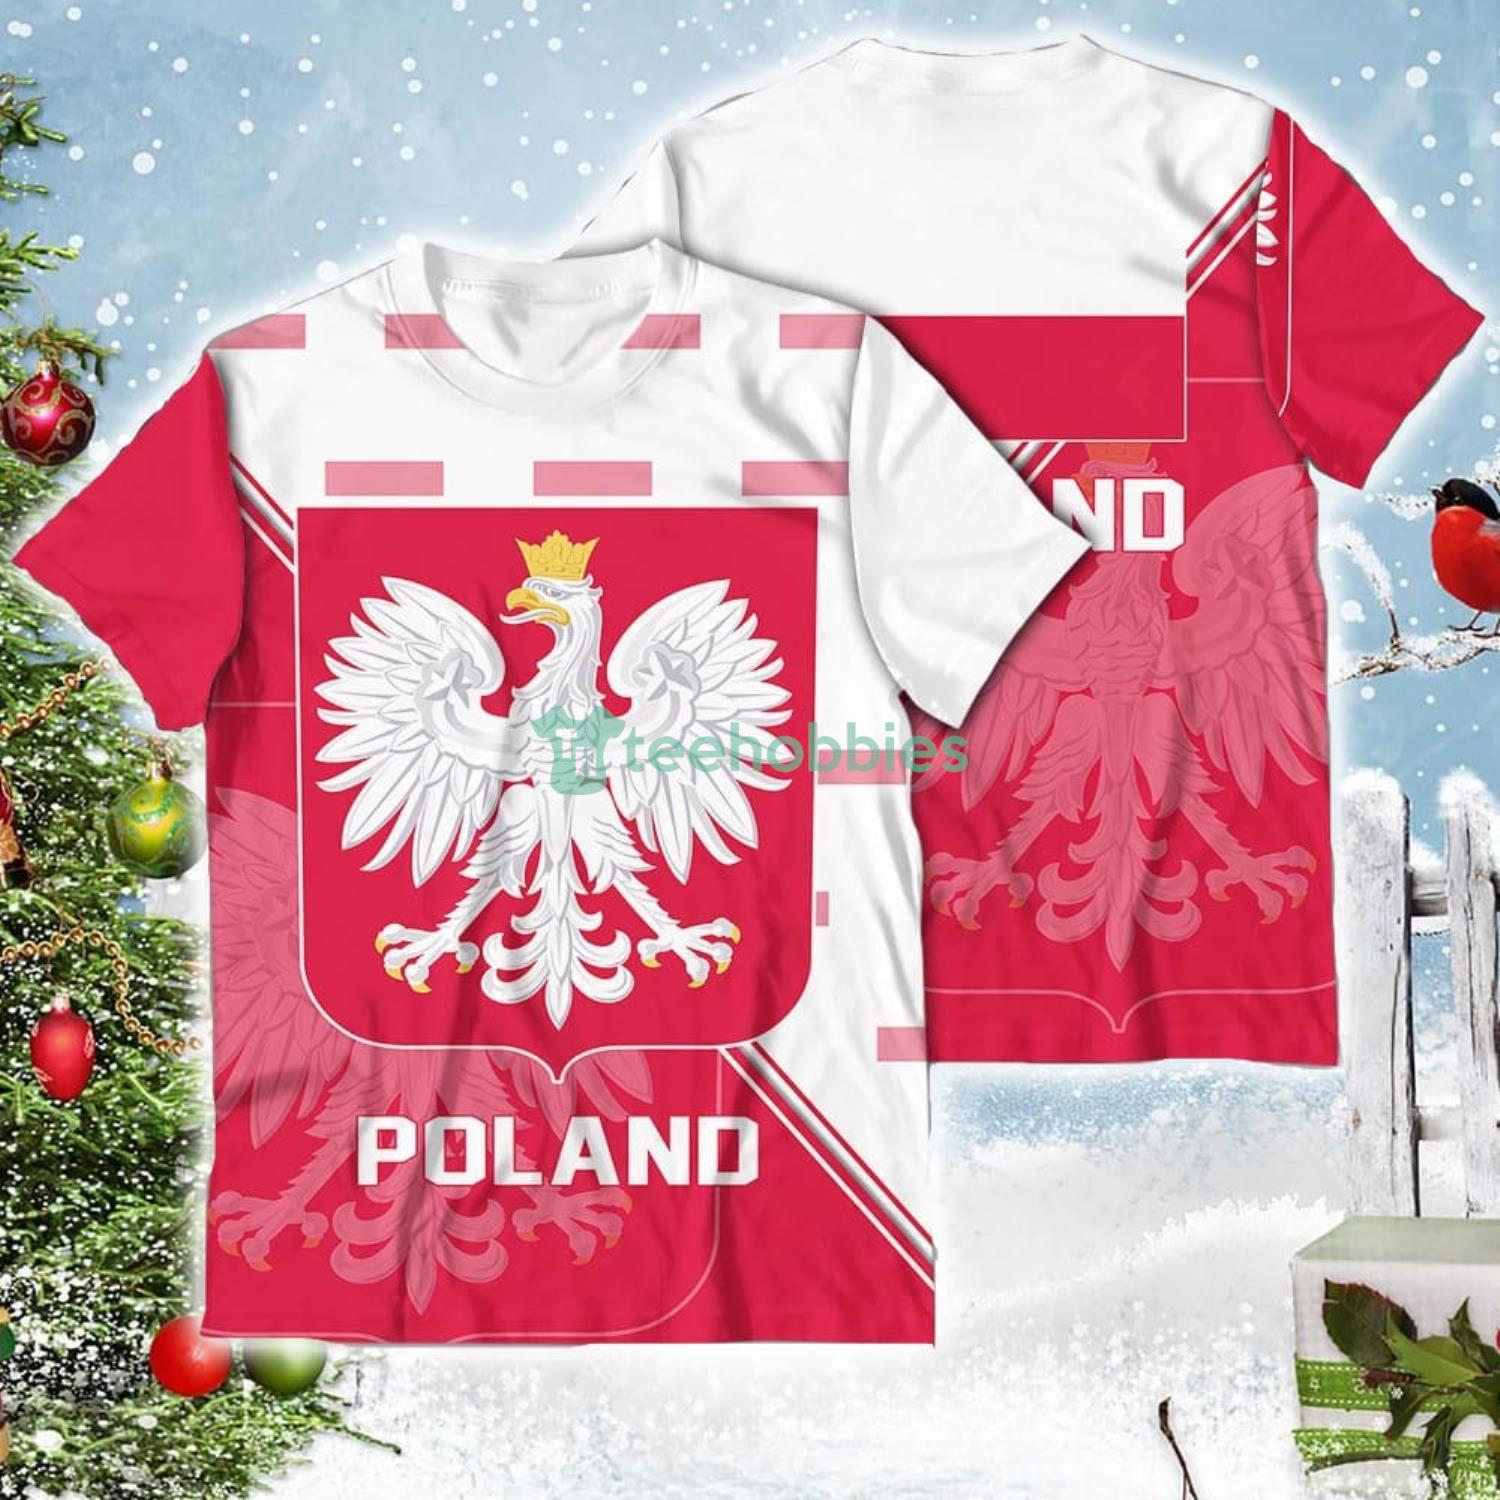 Poland National Soccer Team Qatar World Cup 2022 Champions Soccer Team 3D All Over Printed Shirt Product Photo 2